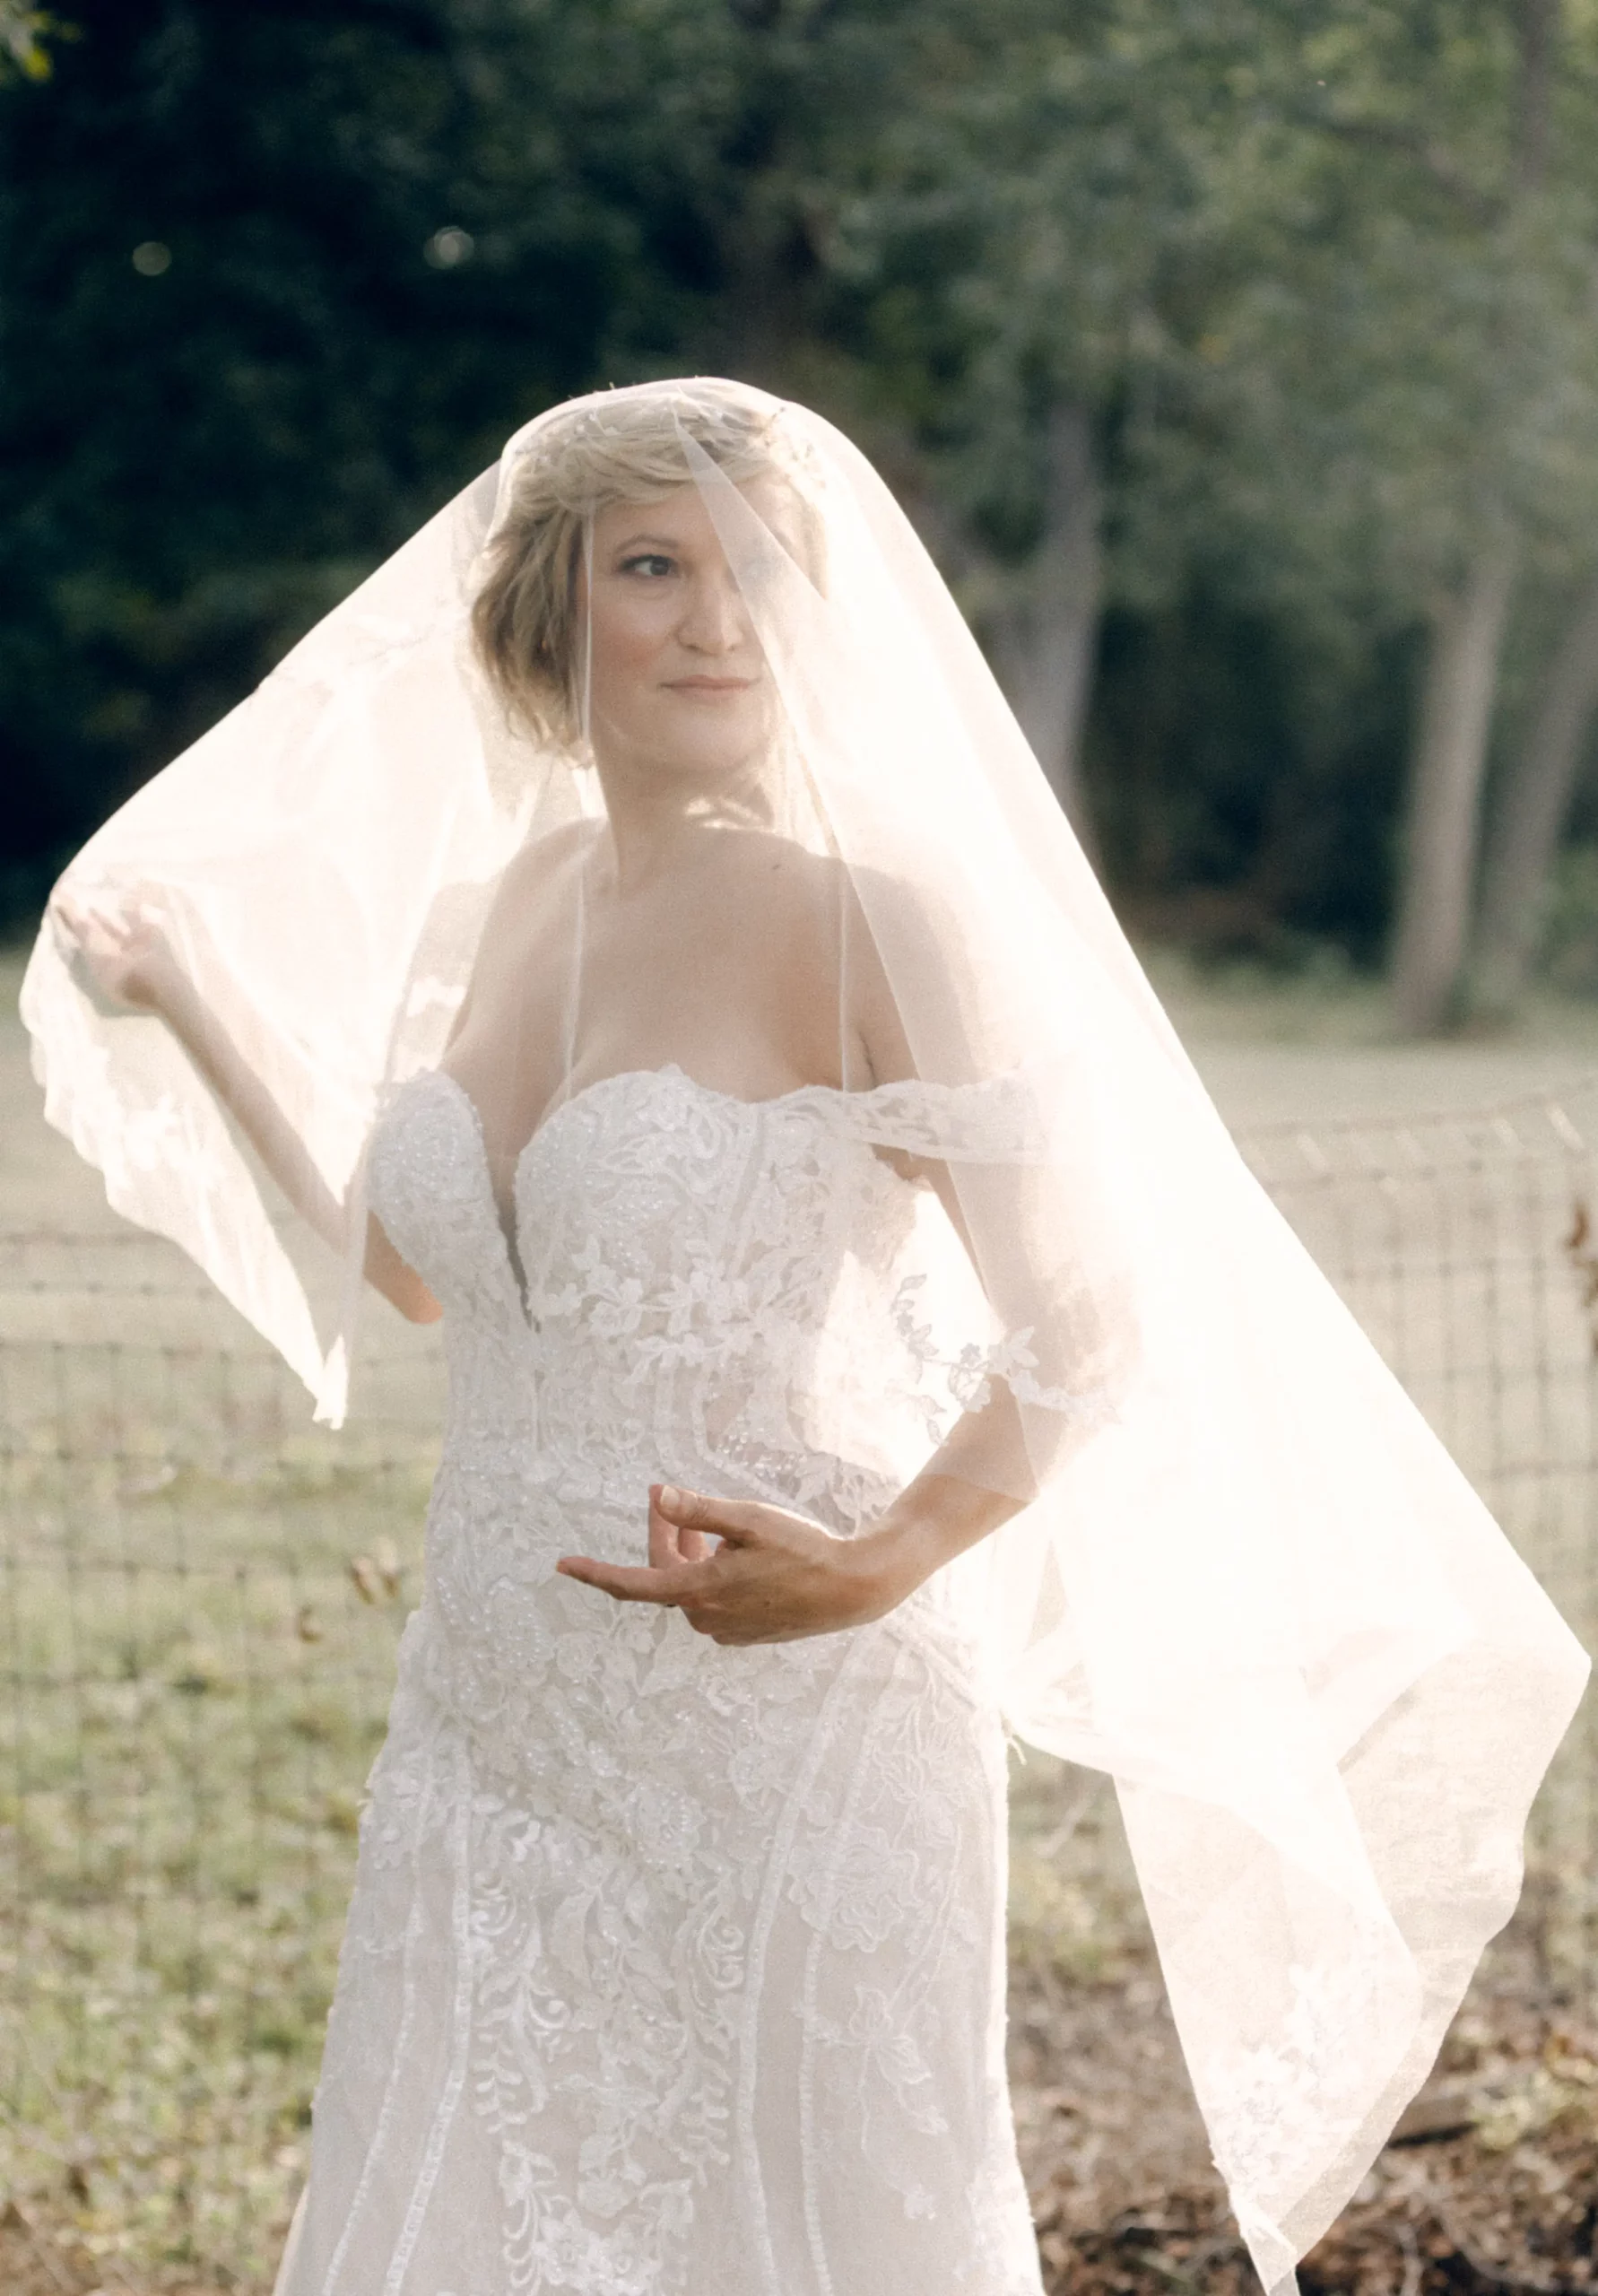 A close up of the bride with a veil draped over her in the middle of an open field during golden hour | Rae Allen Photography | Stonehaus Fall Styled Shoot